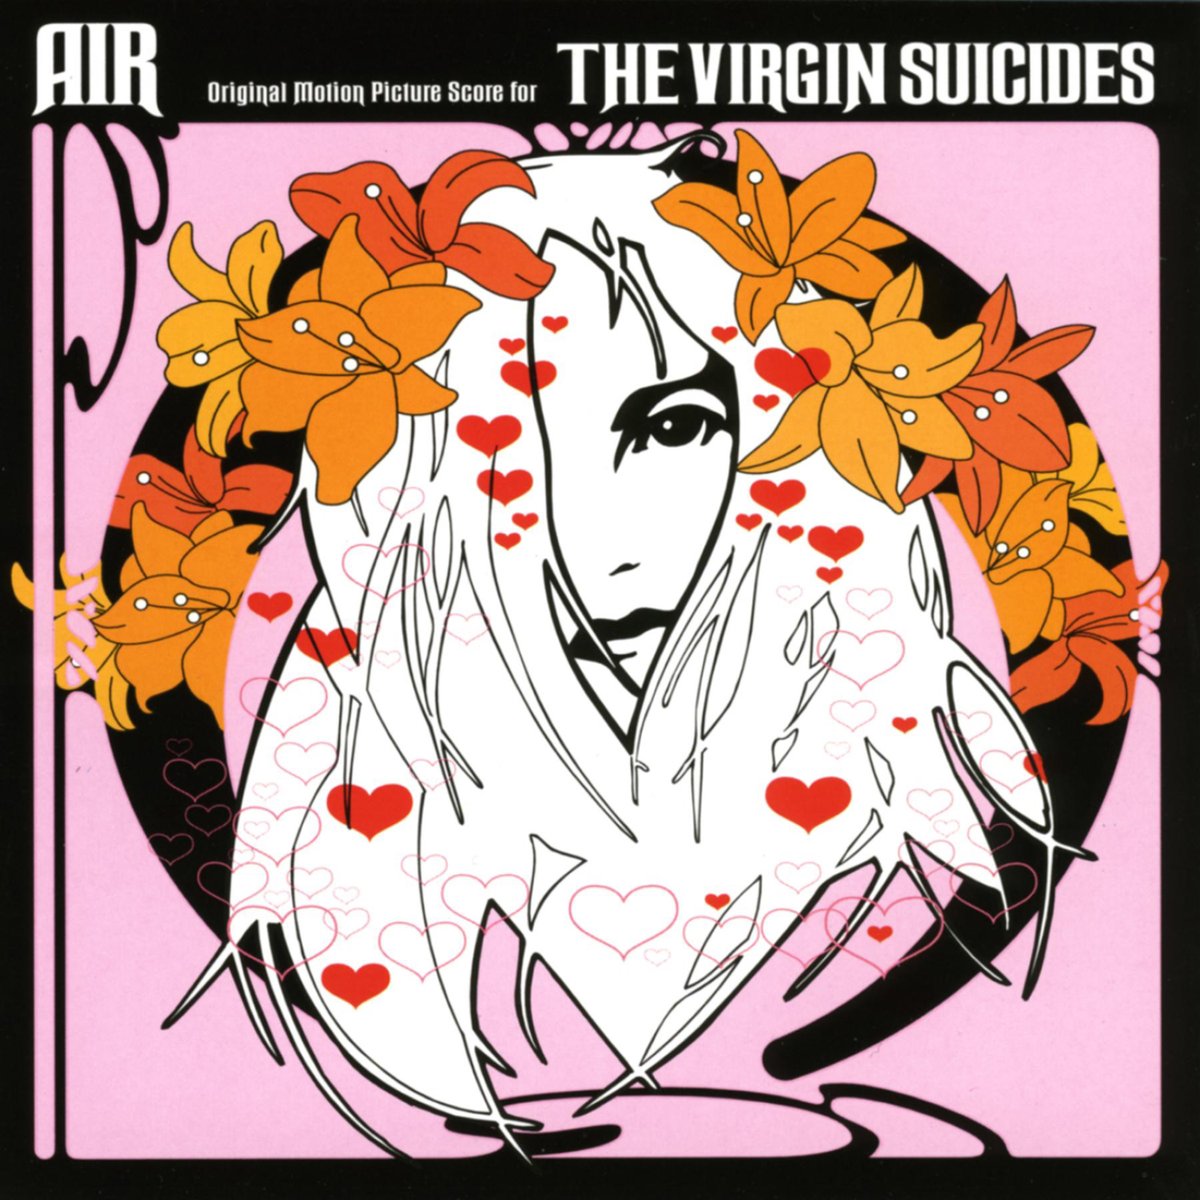 Air's The Virgin Suicides score proved just as bold and cosmic as their classic debut

Read why we named the score one of the 50 best of all time here: p4k.in/zBUNAWe